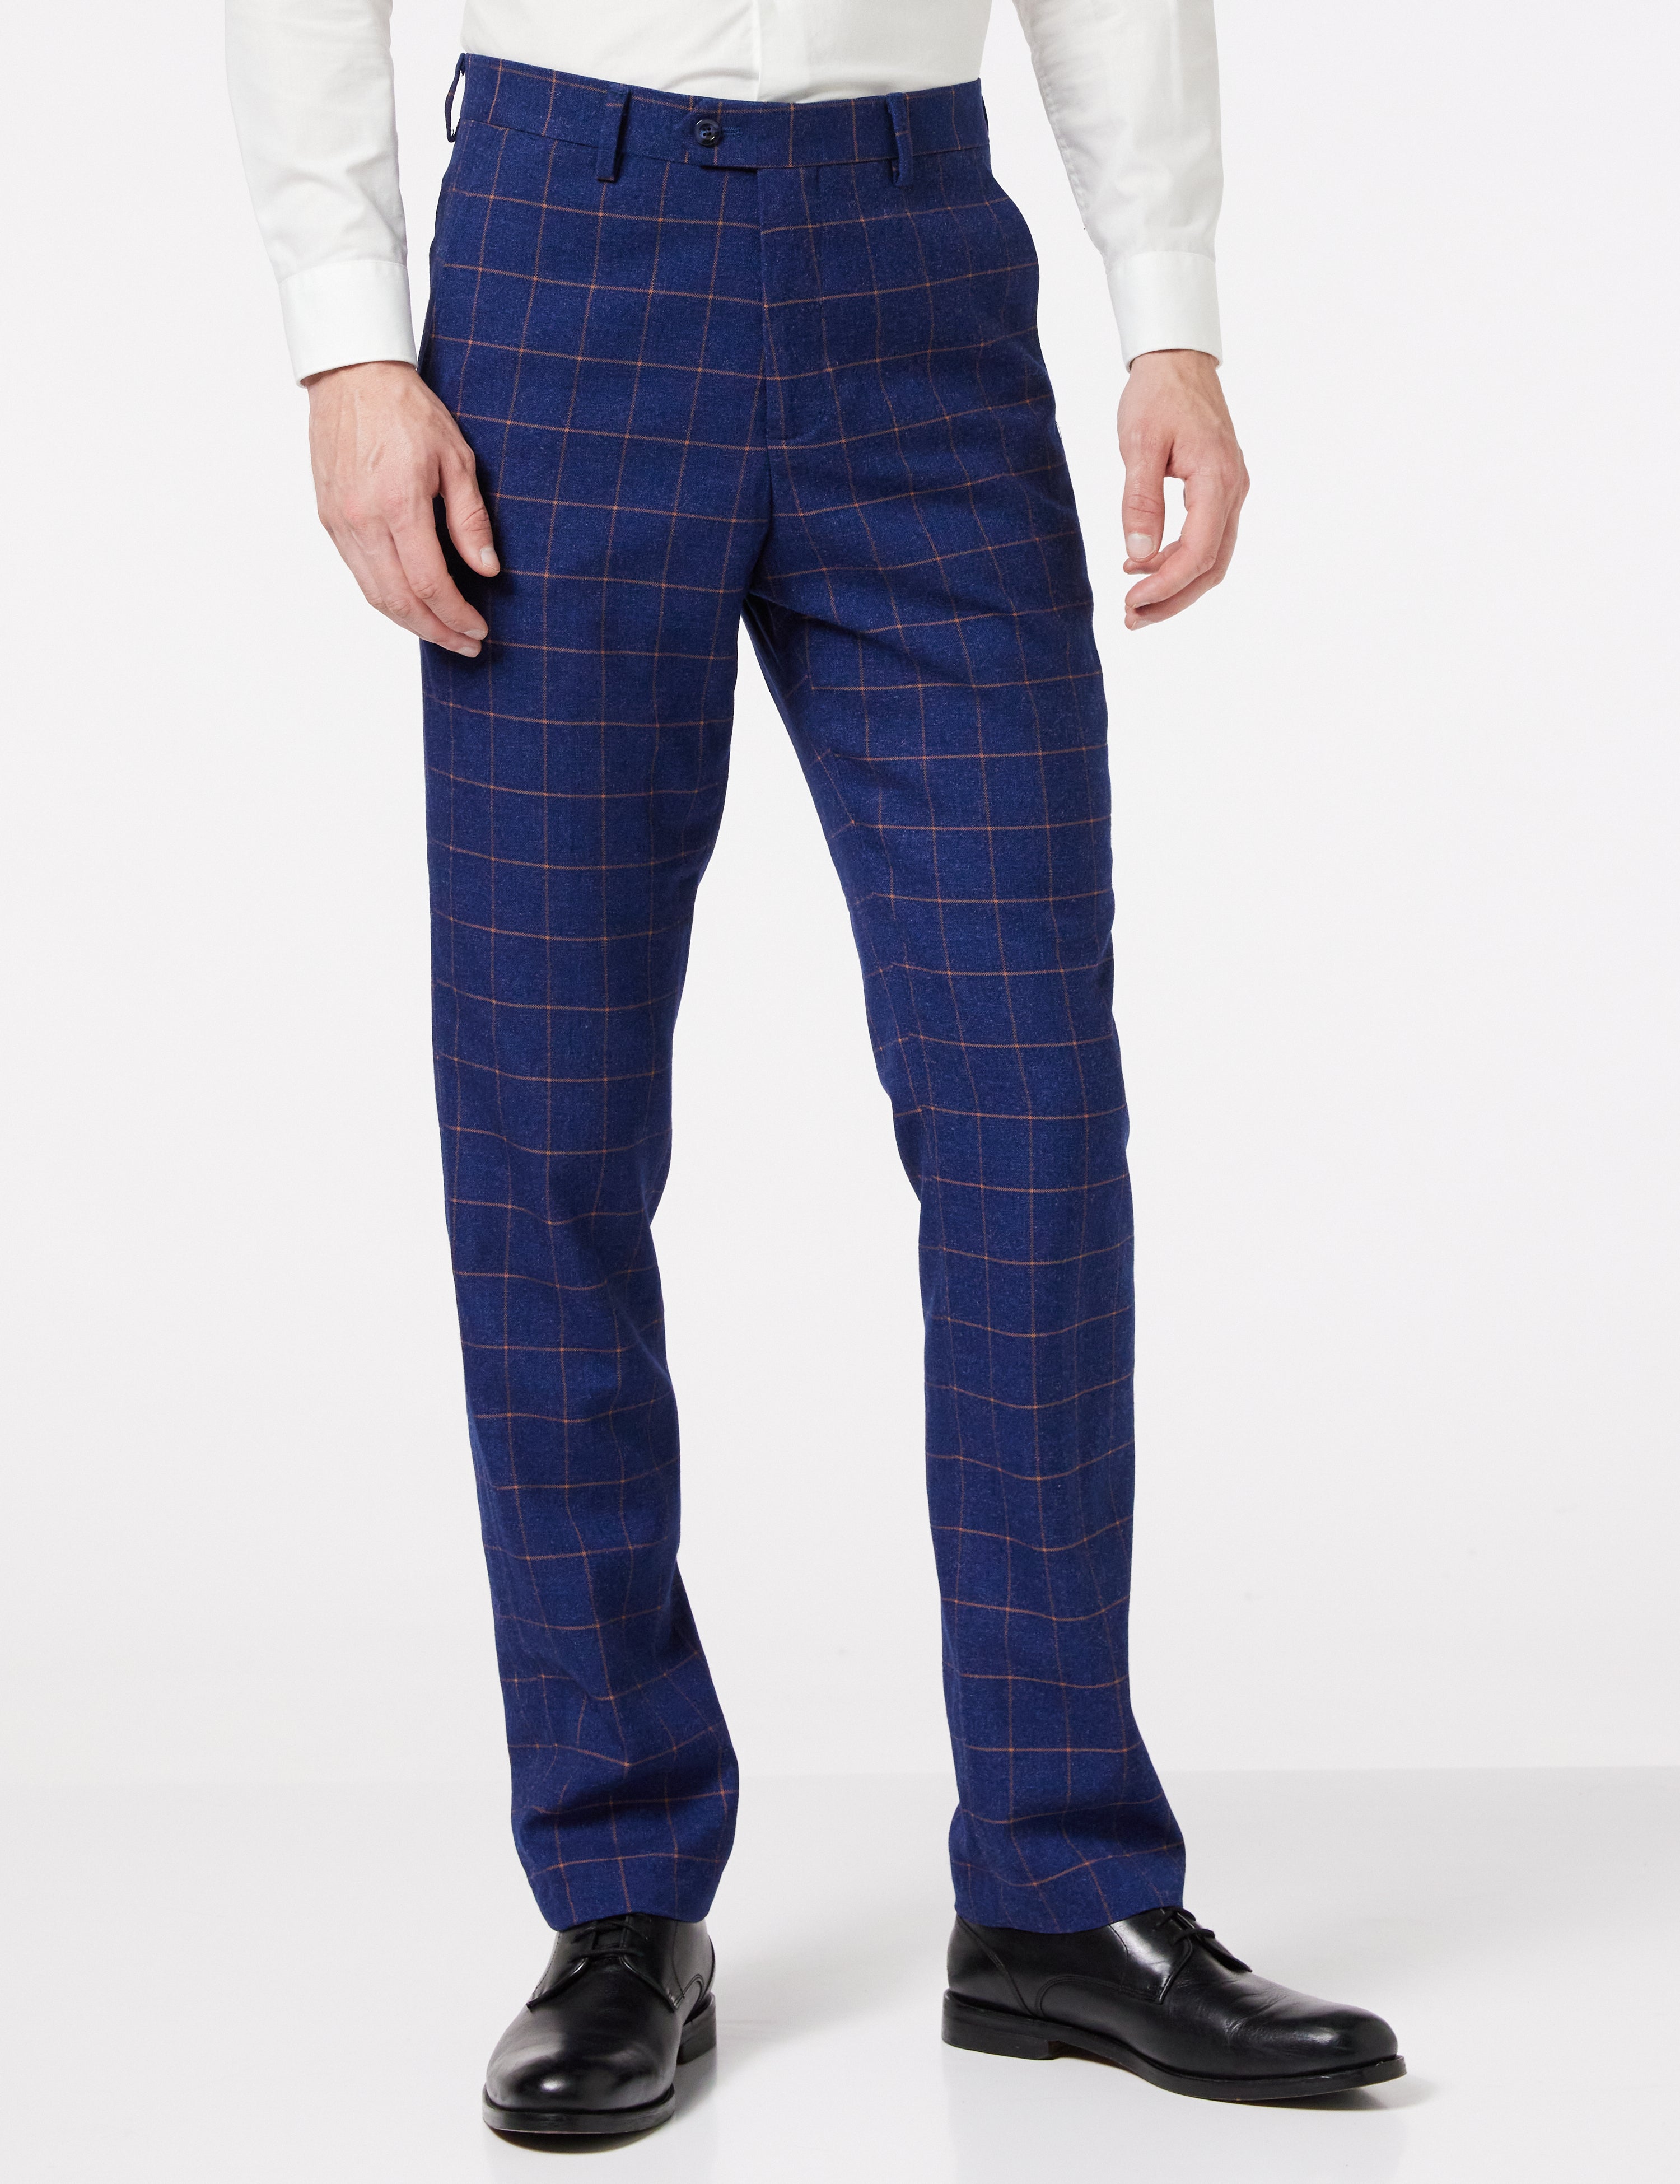 Mens Vintage Style Suit Trousers in Pinstripe & Checks | XPOSED London